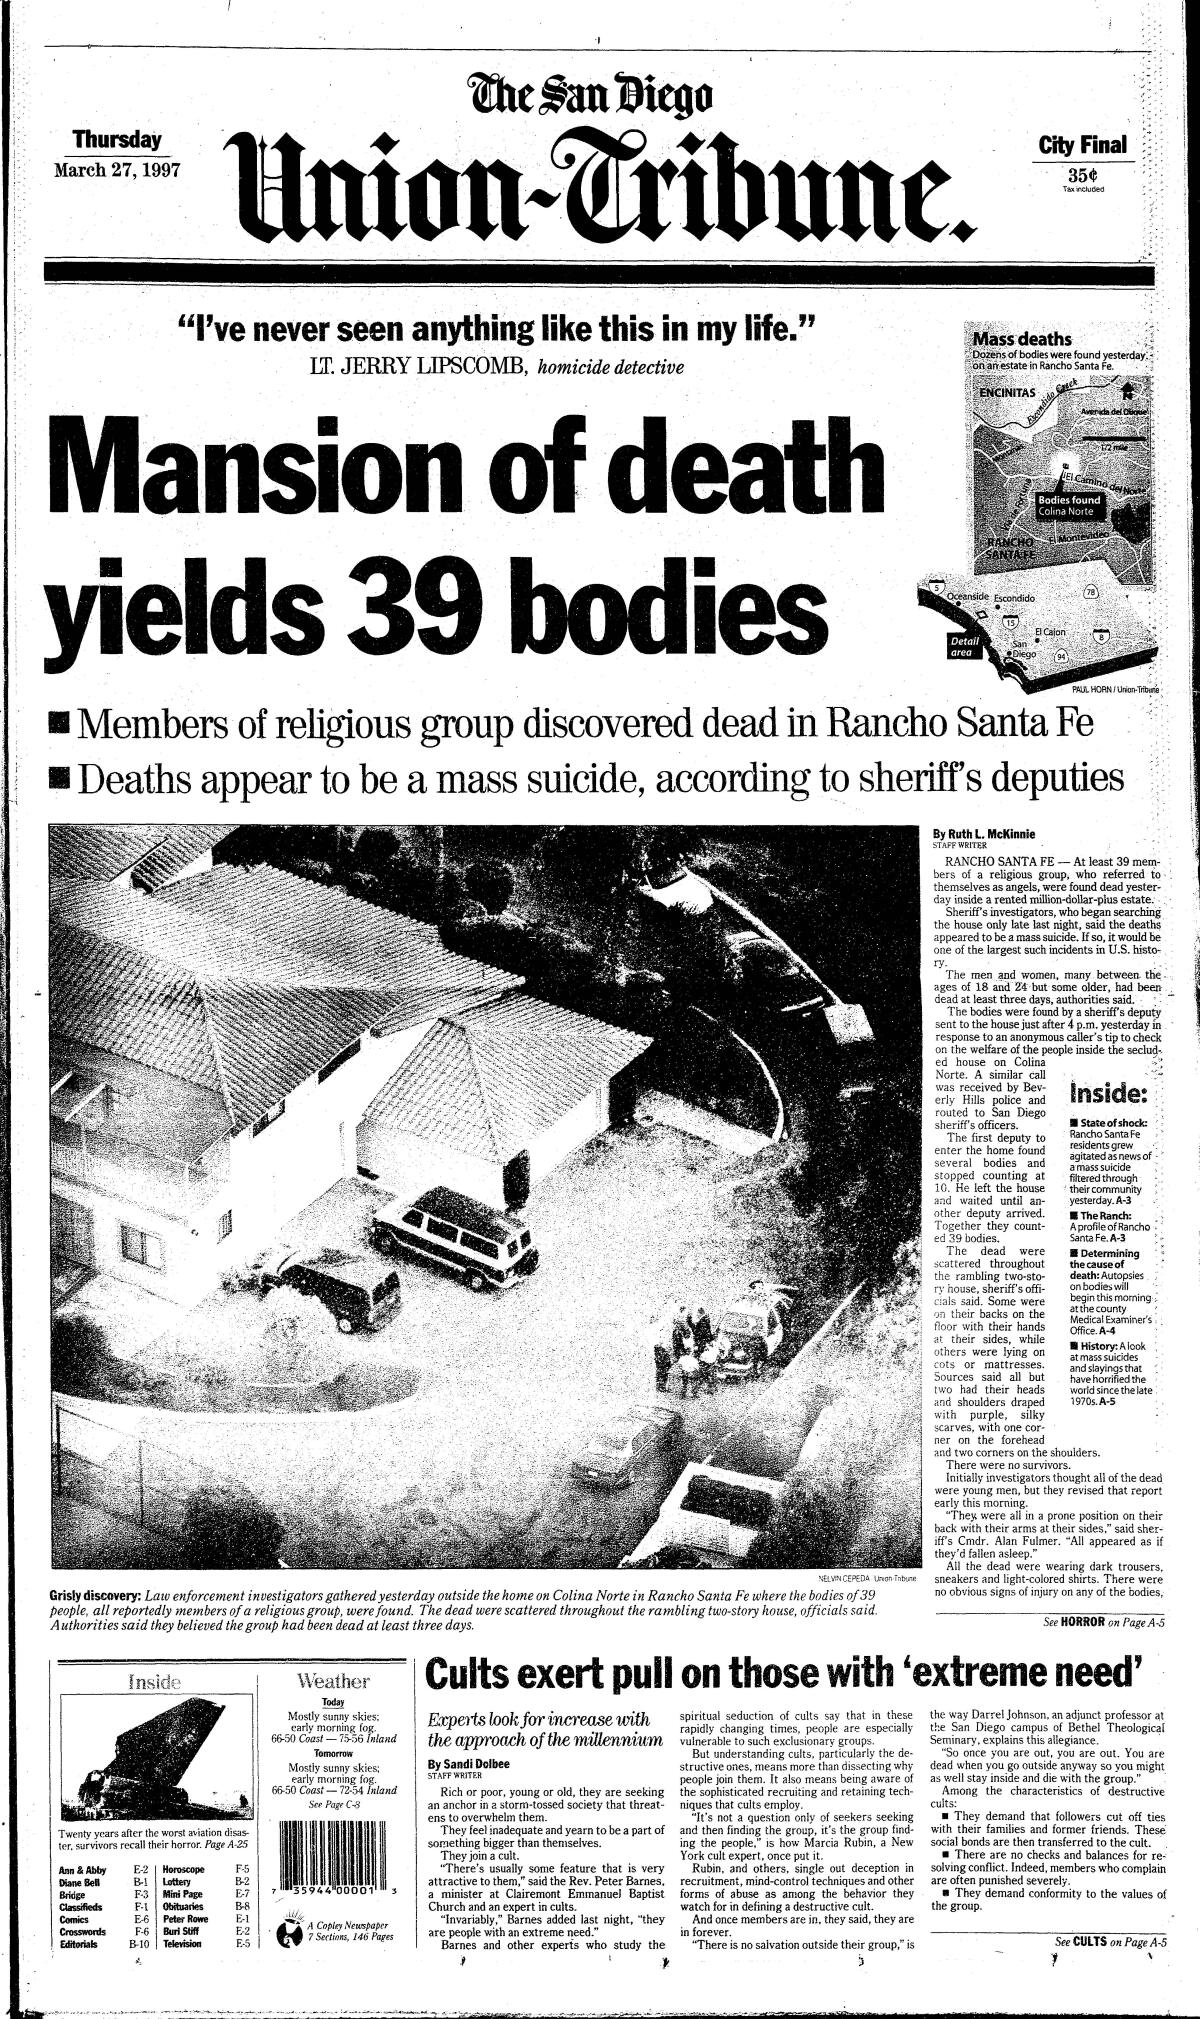 The San Diego Union-Tribune's front page from March 27, 1997 reports on the Heaven's Gate mass suicide in Rancho Santa Fe.